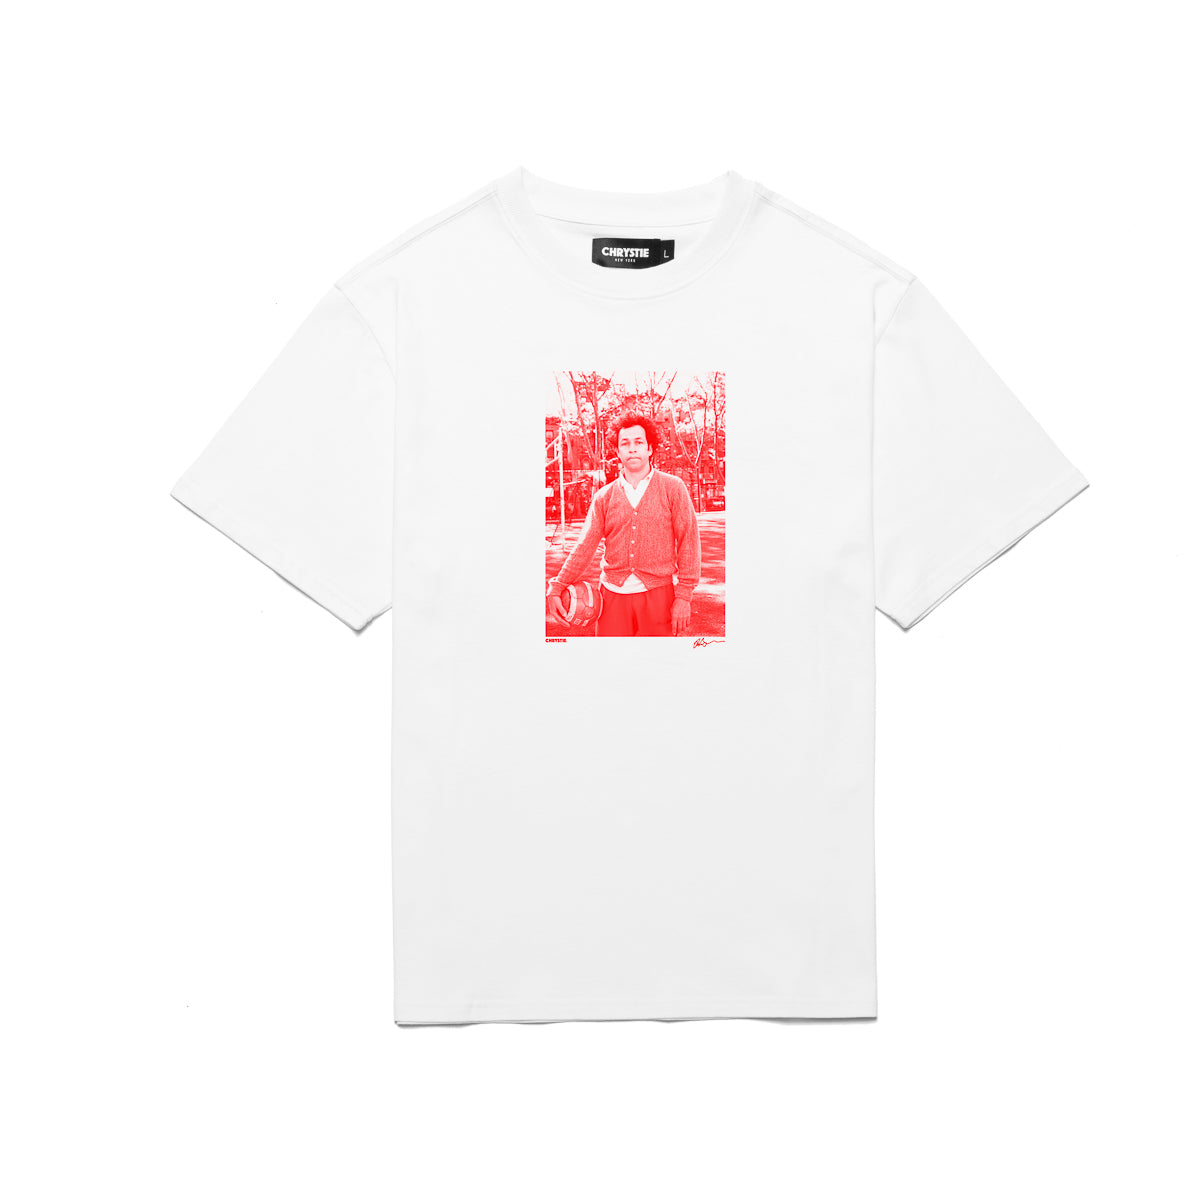 Load image into Gallery viewer, Chrystie x CSC Gonz Tee